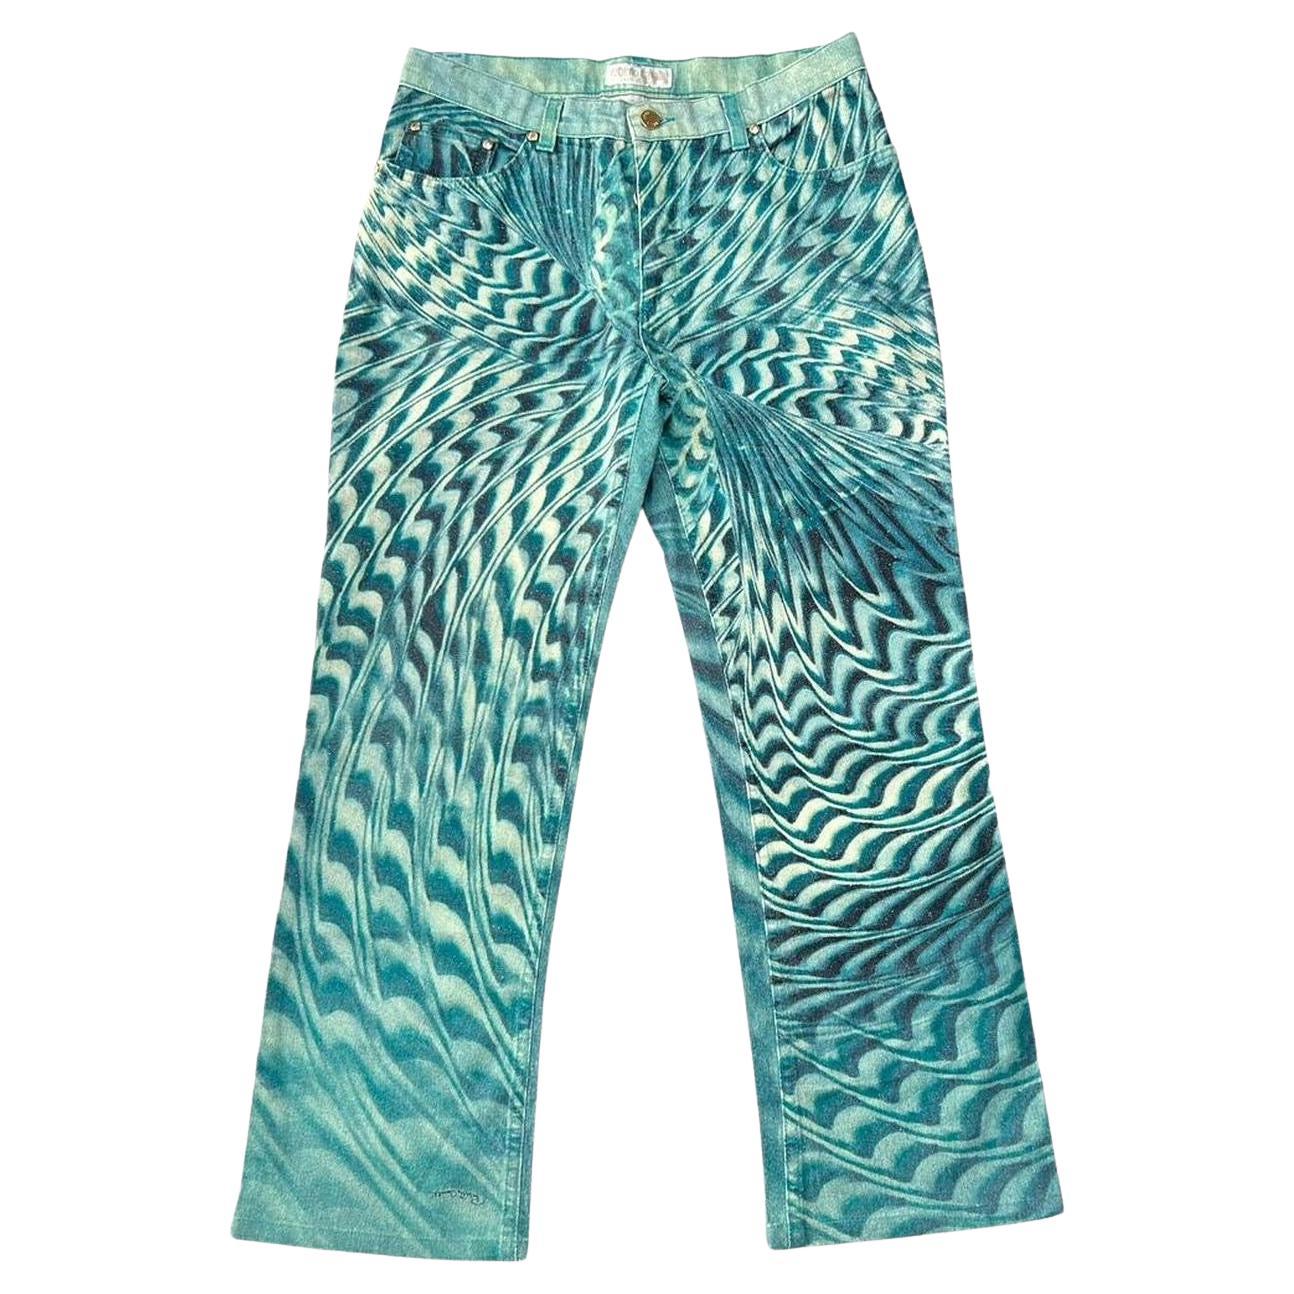 2001 Roberto Cavalli Teal Blue Psychedelic Print Cotton Twill Pants For Sale